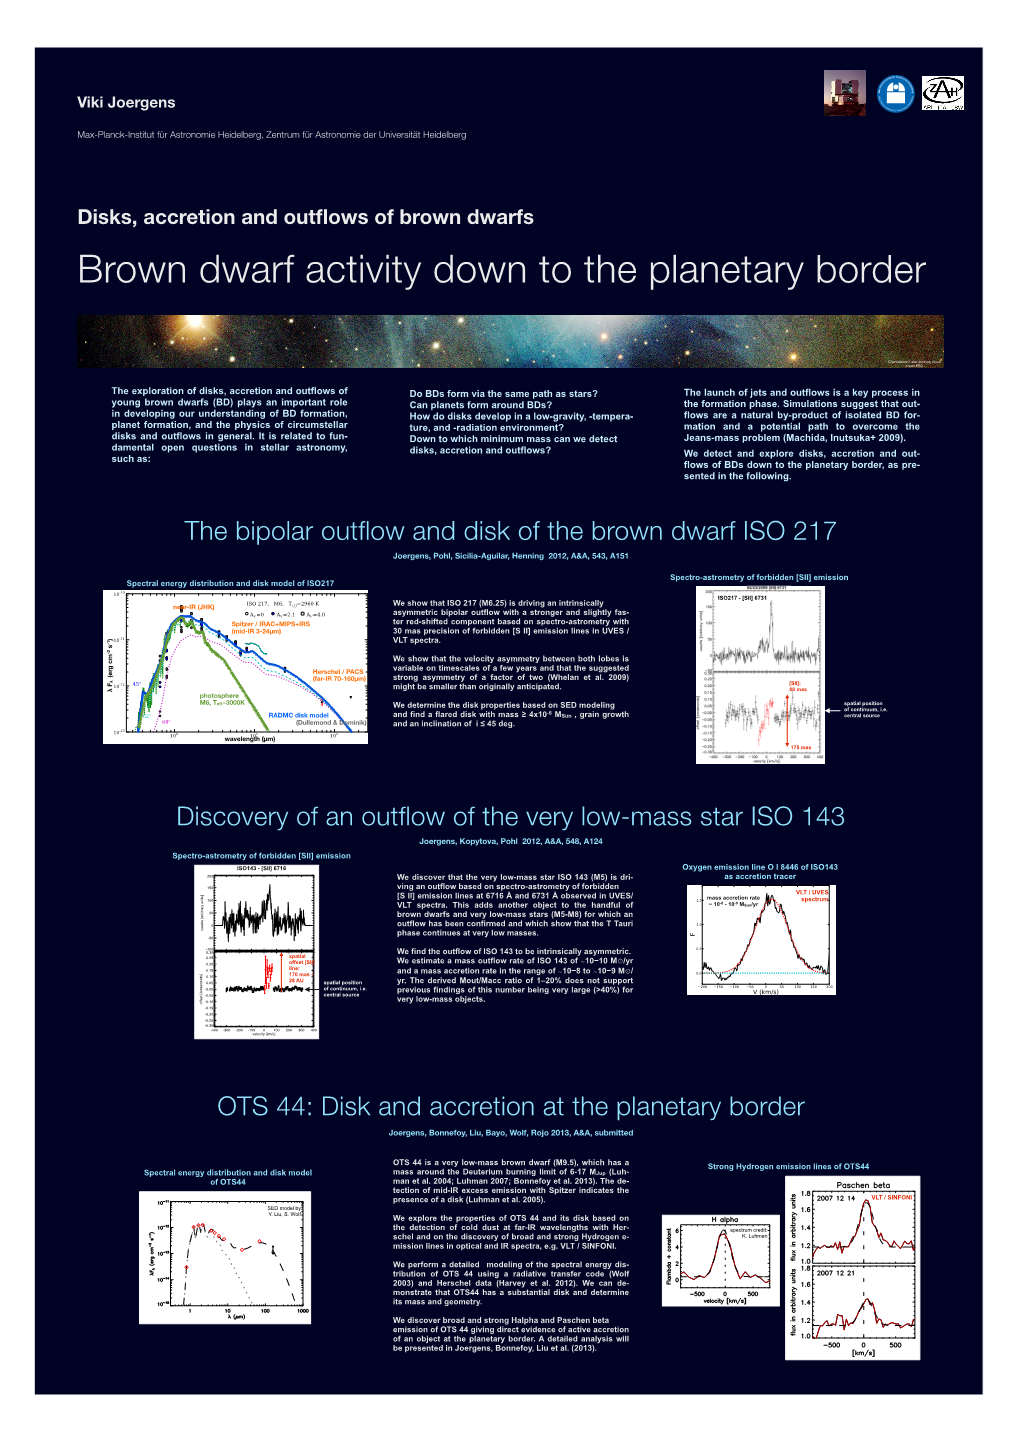 Brown Dwarf Activity Down to the Planetary Border